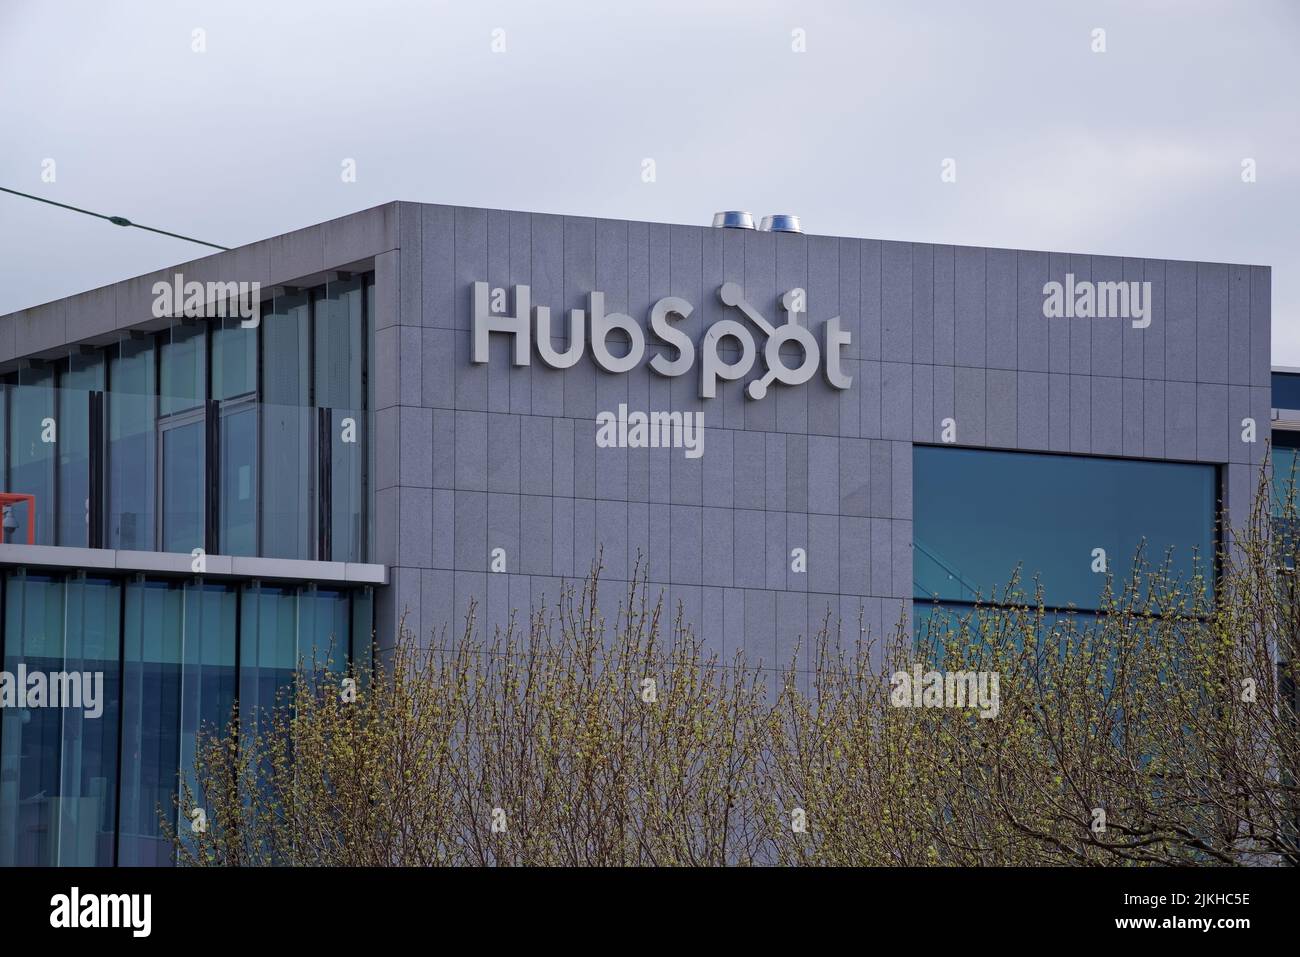 HubSpot signage at the top of a modern office building in Dublin city centre on cloudy day. The HubSpot is CRM platform for scaling companies. Stock Photo